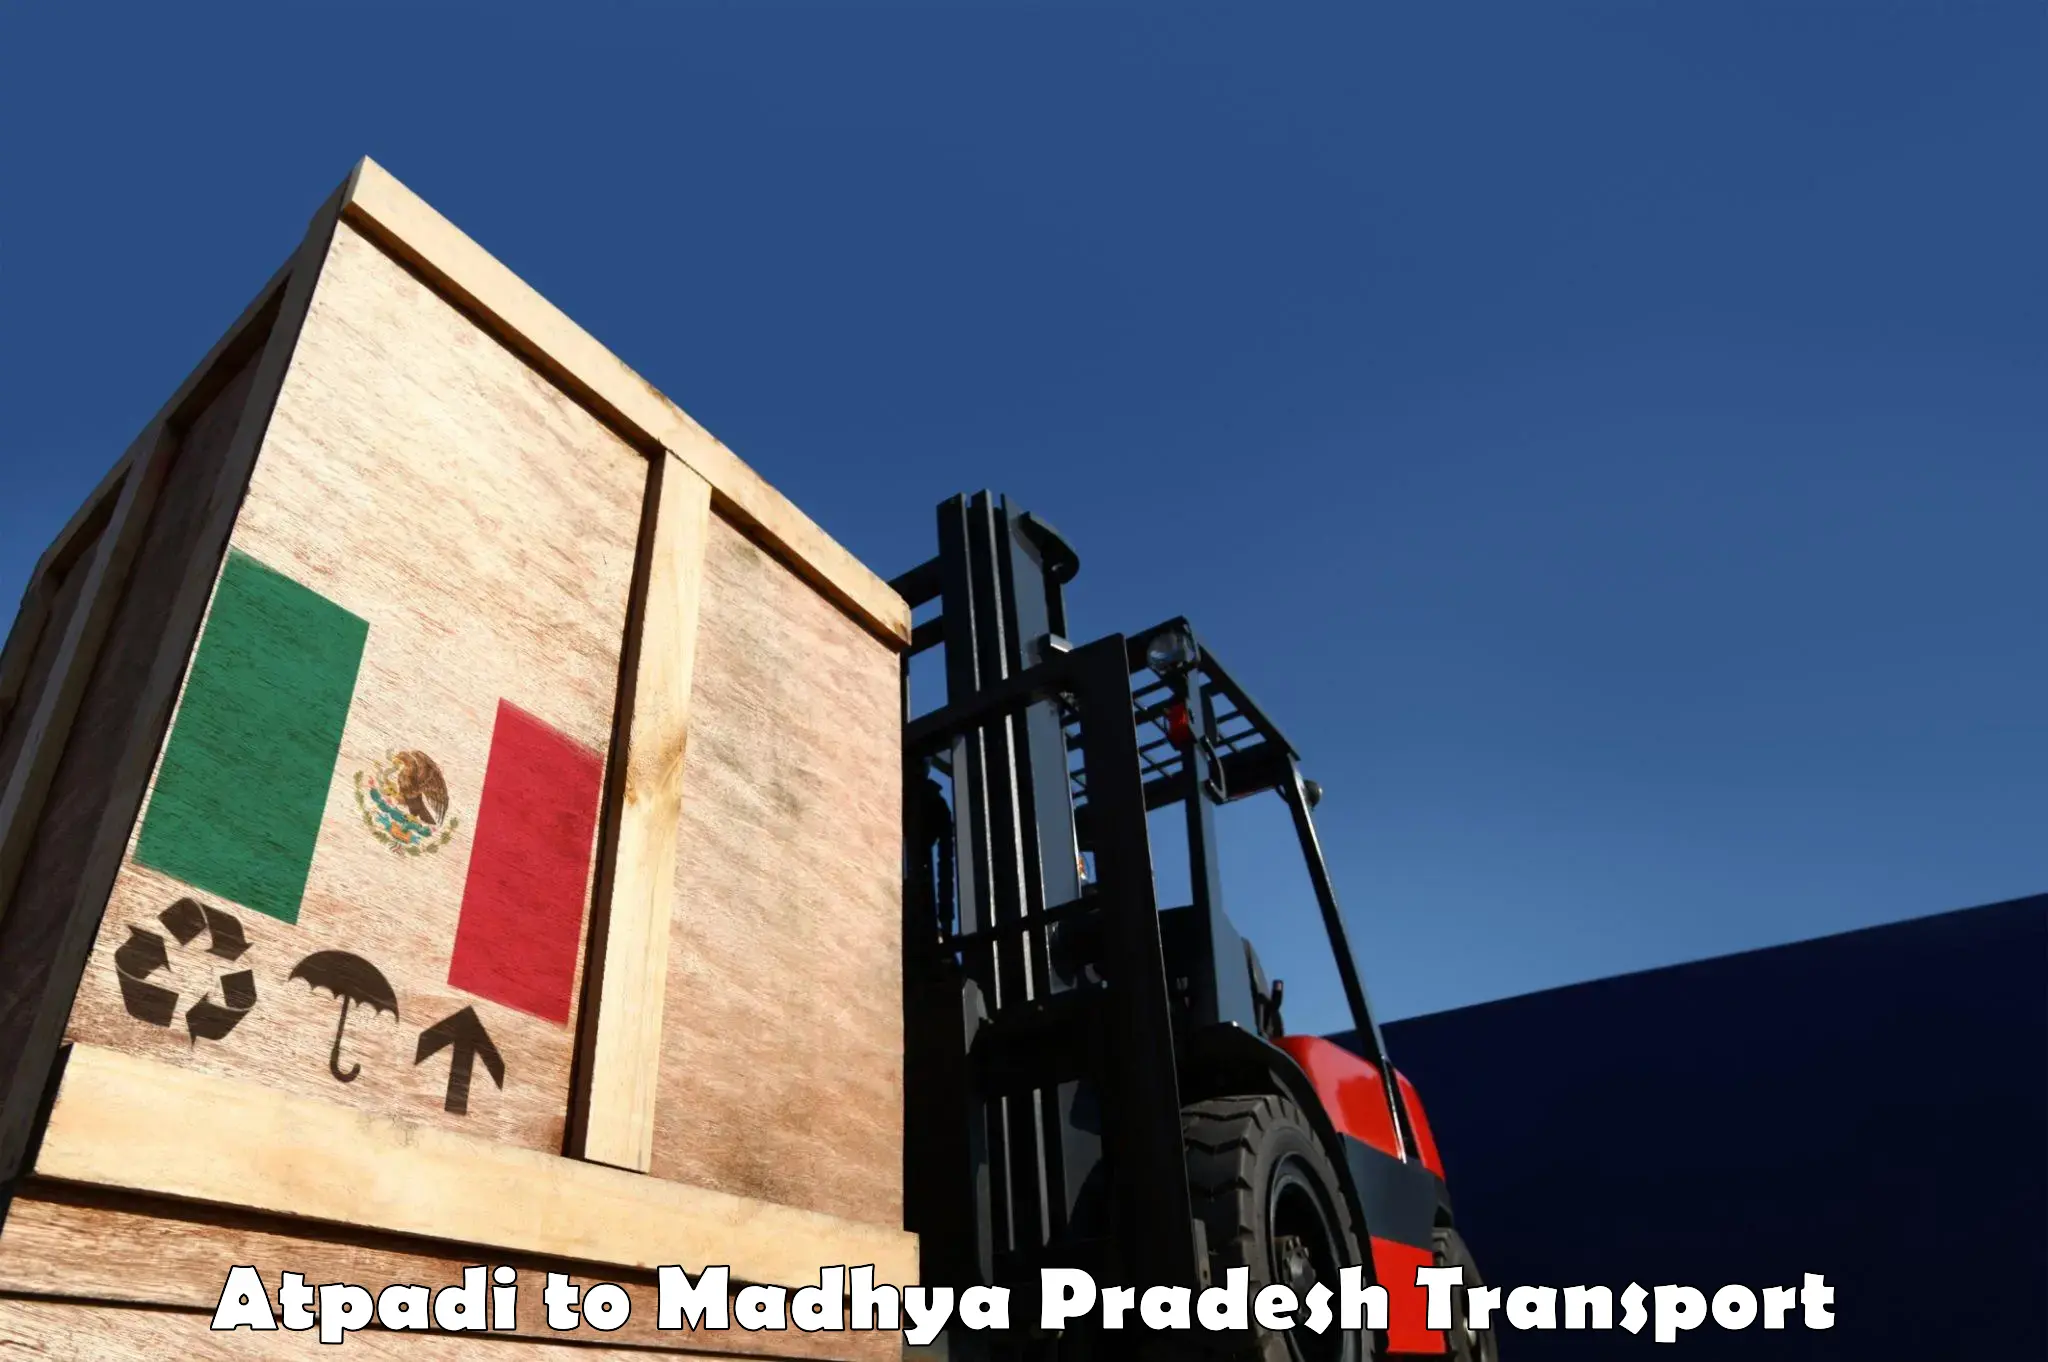 Commercial transport service Atpadi to Chand Chaurai